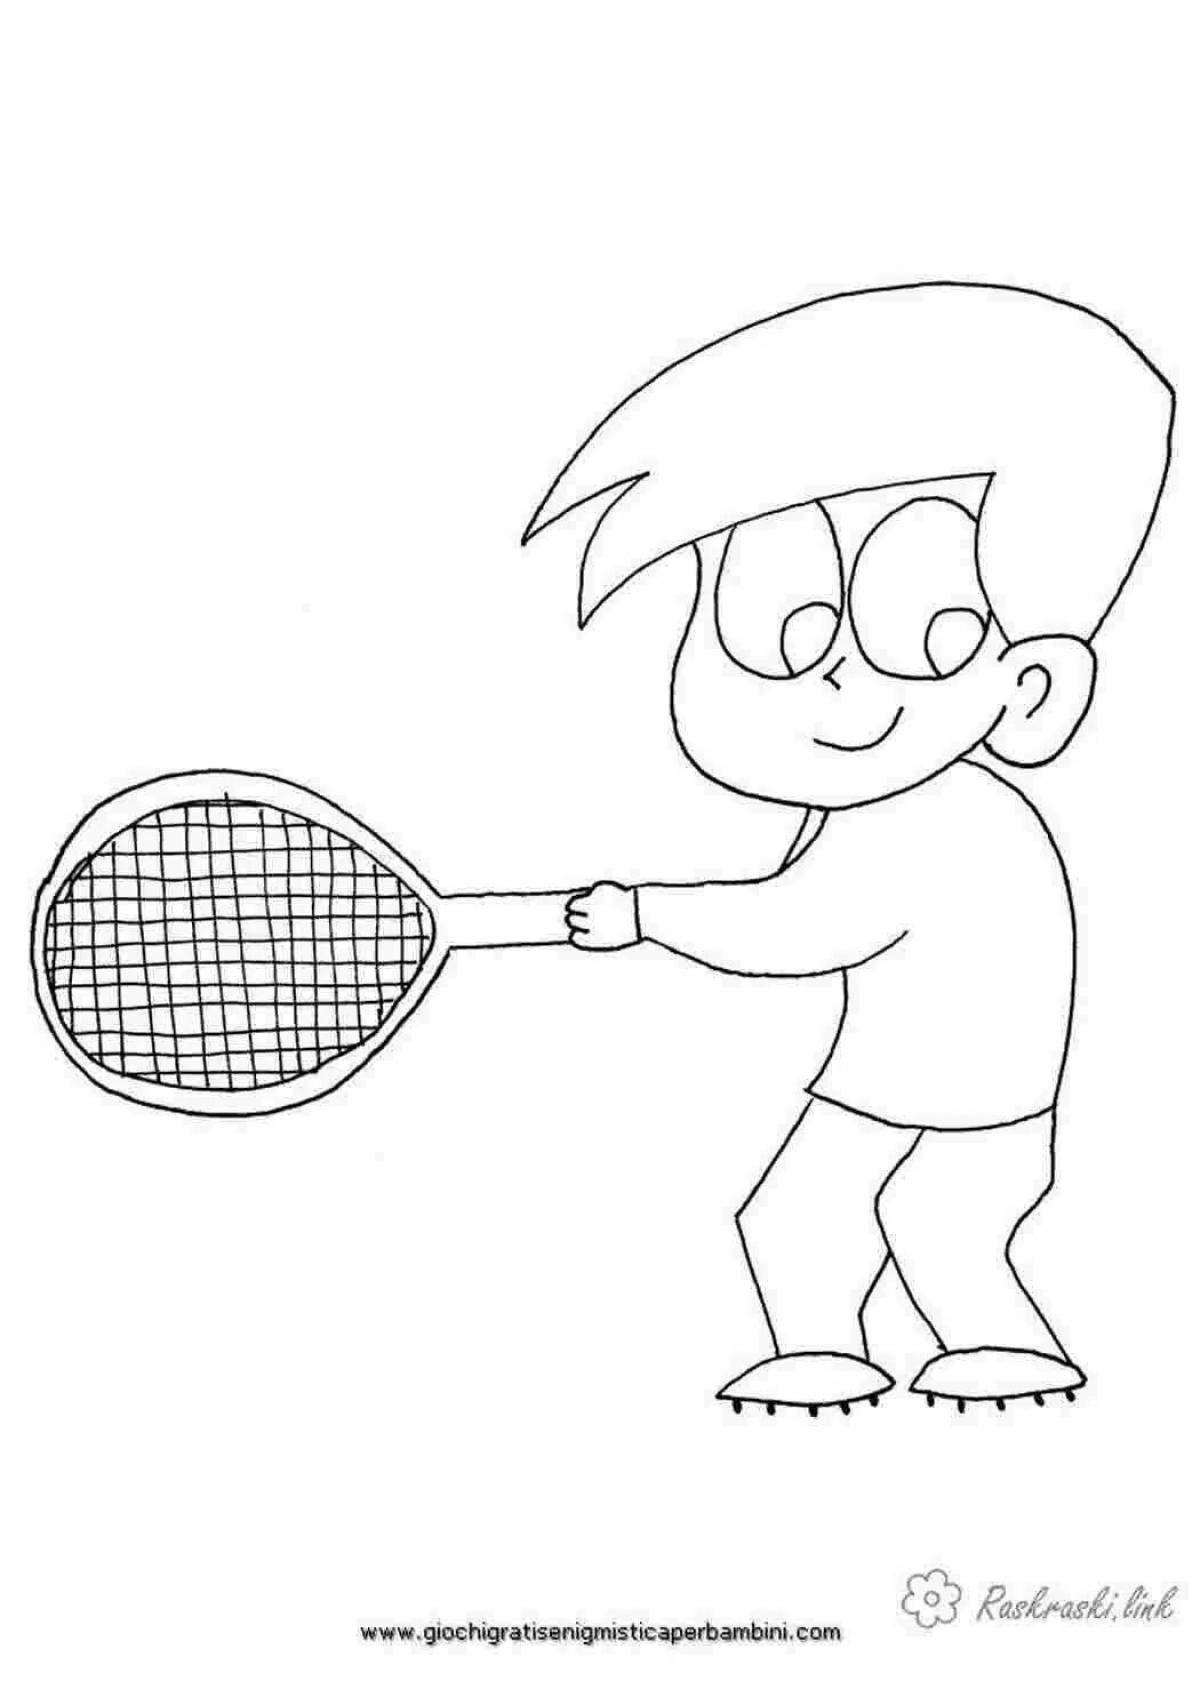 Creative tennis coloring book for kids